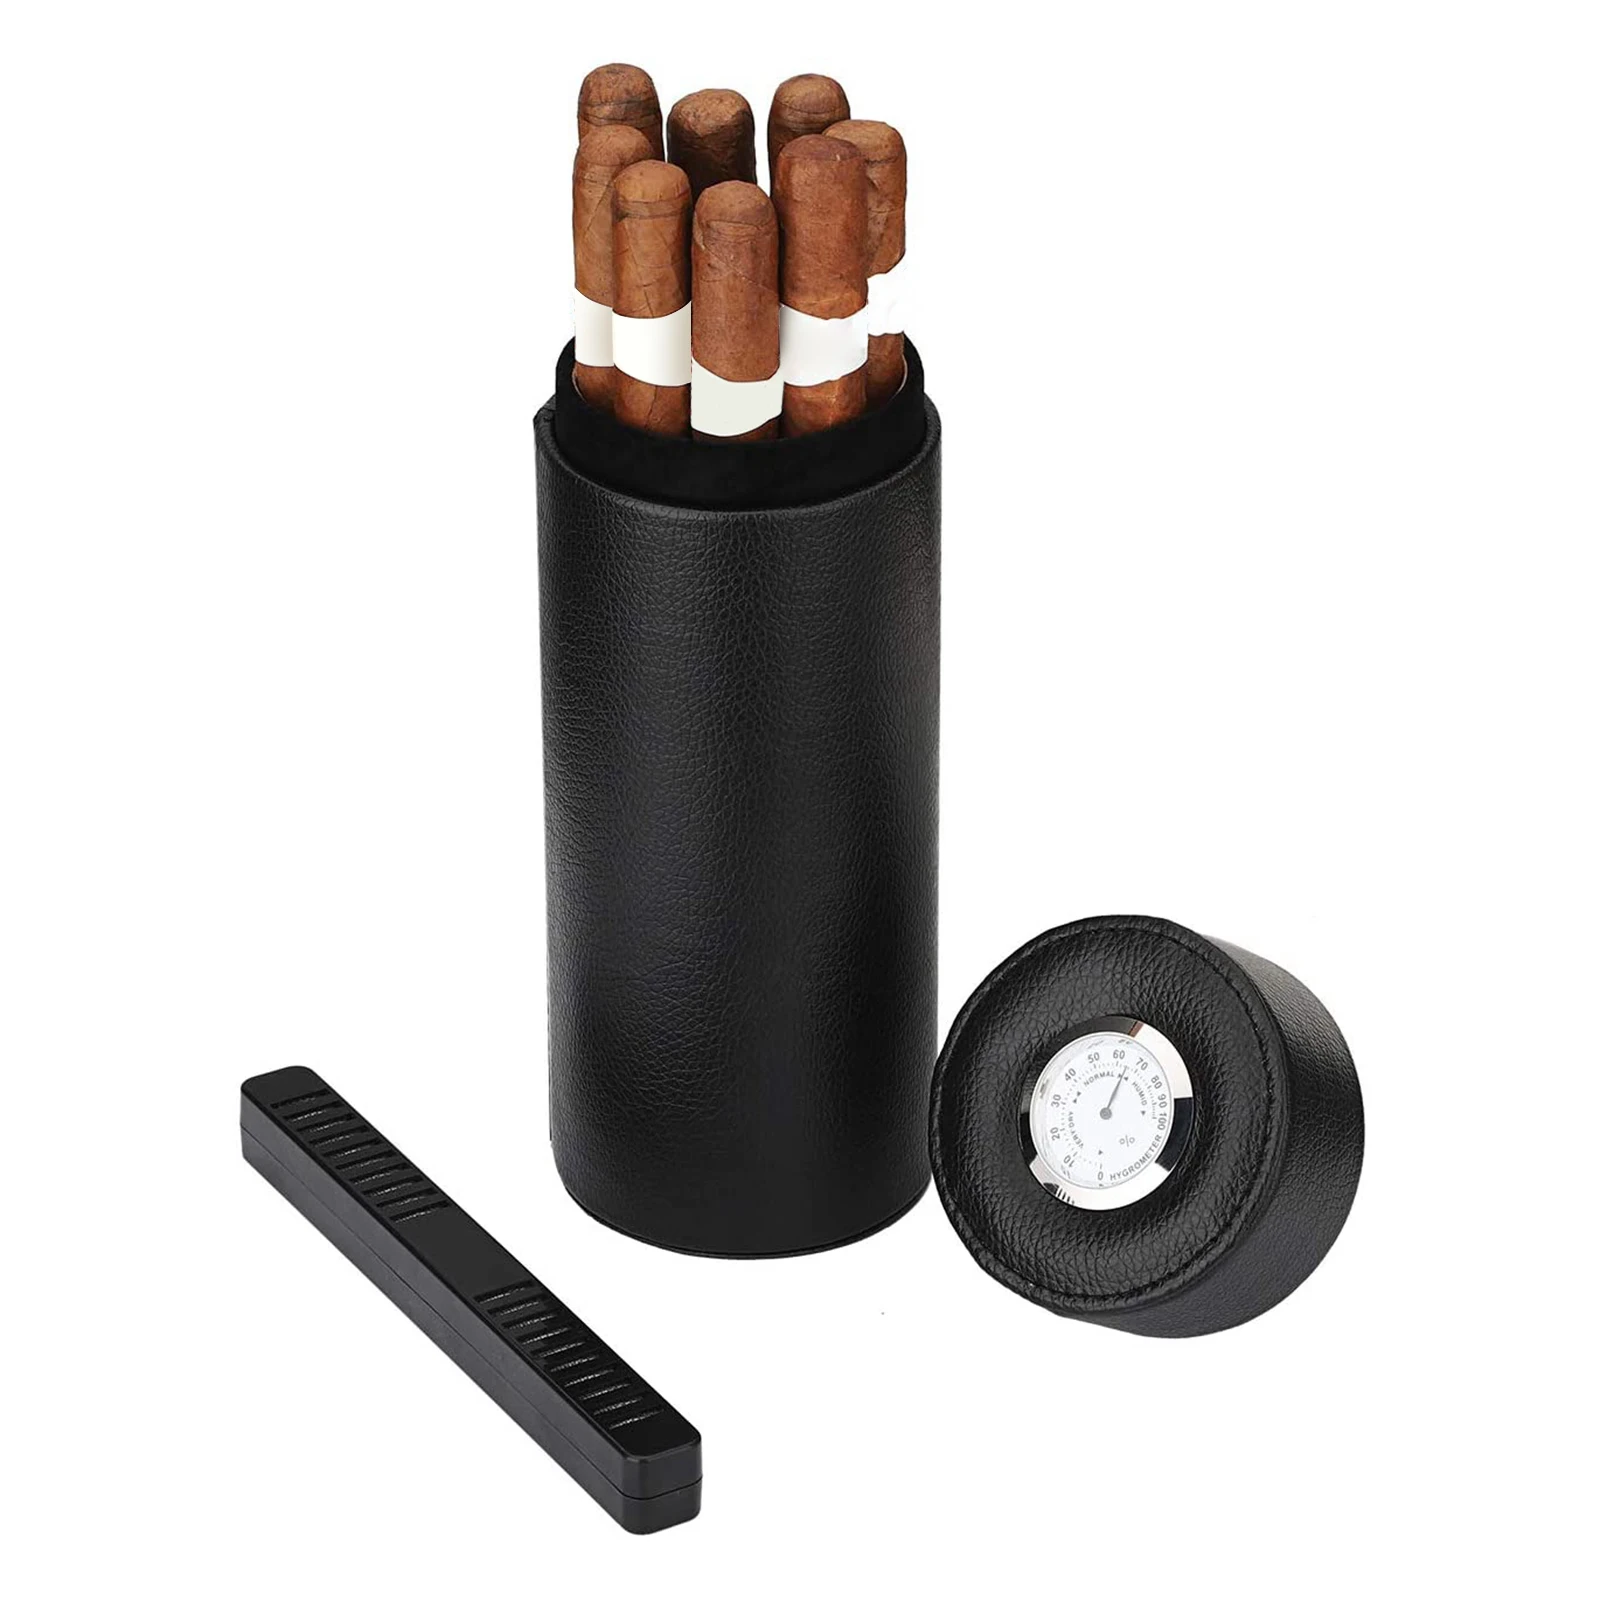 Leather Cigar Case Black Portable Travel Cigar Humidor Waterproof 5-8 Tubes Holder Humidifier Storage Carrying Case